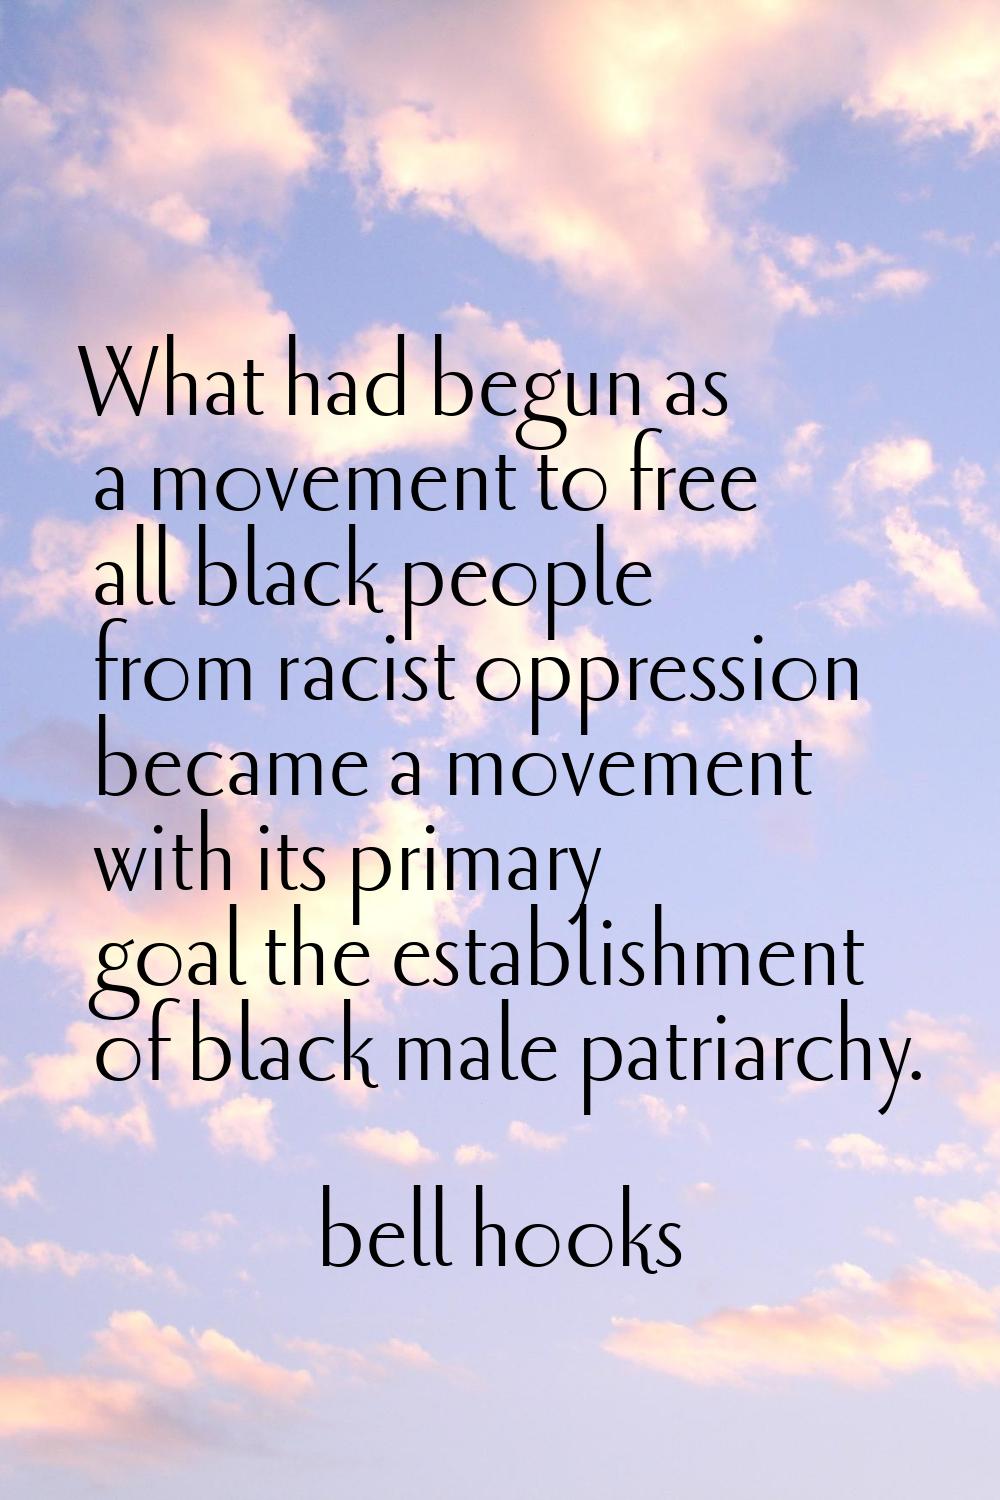 What had begun as a movement to free all black people from racist oppression became a movement with